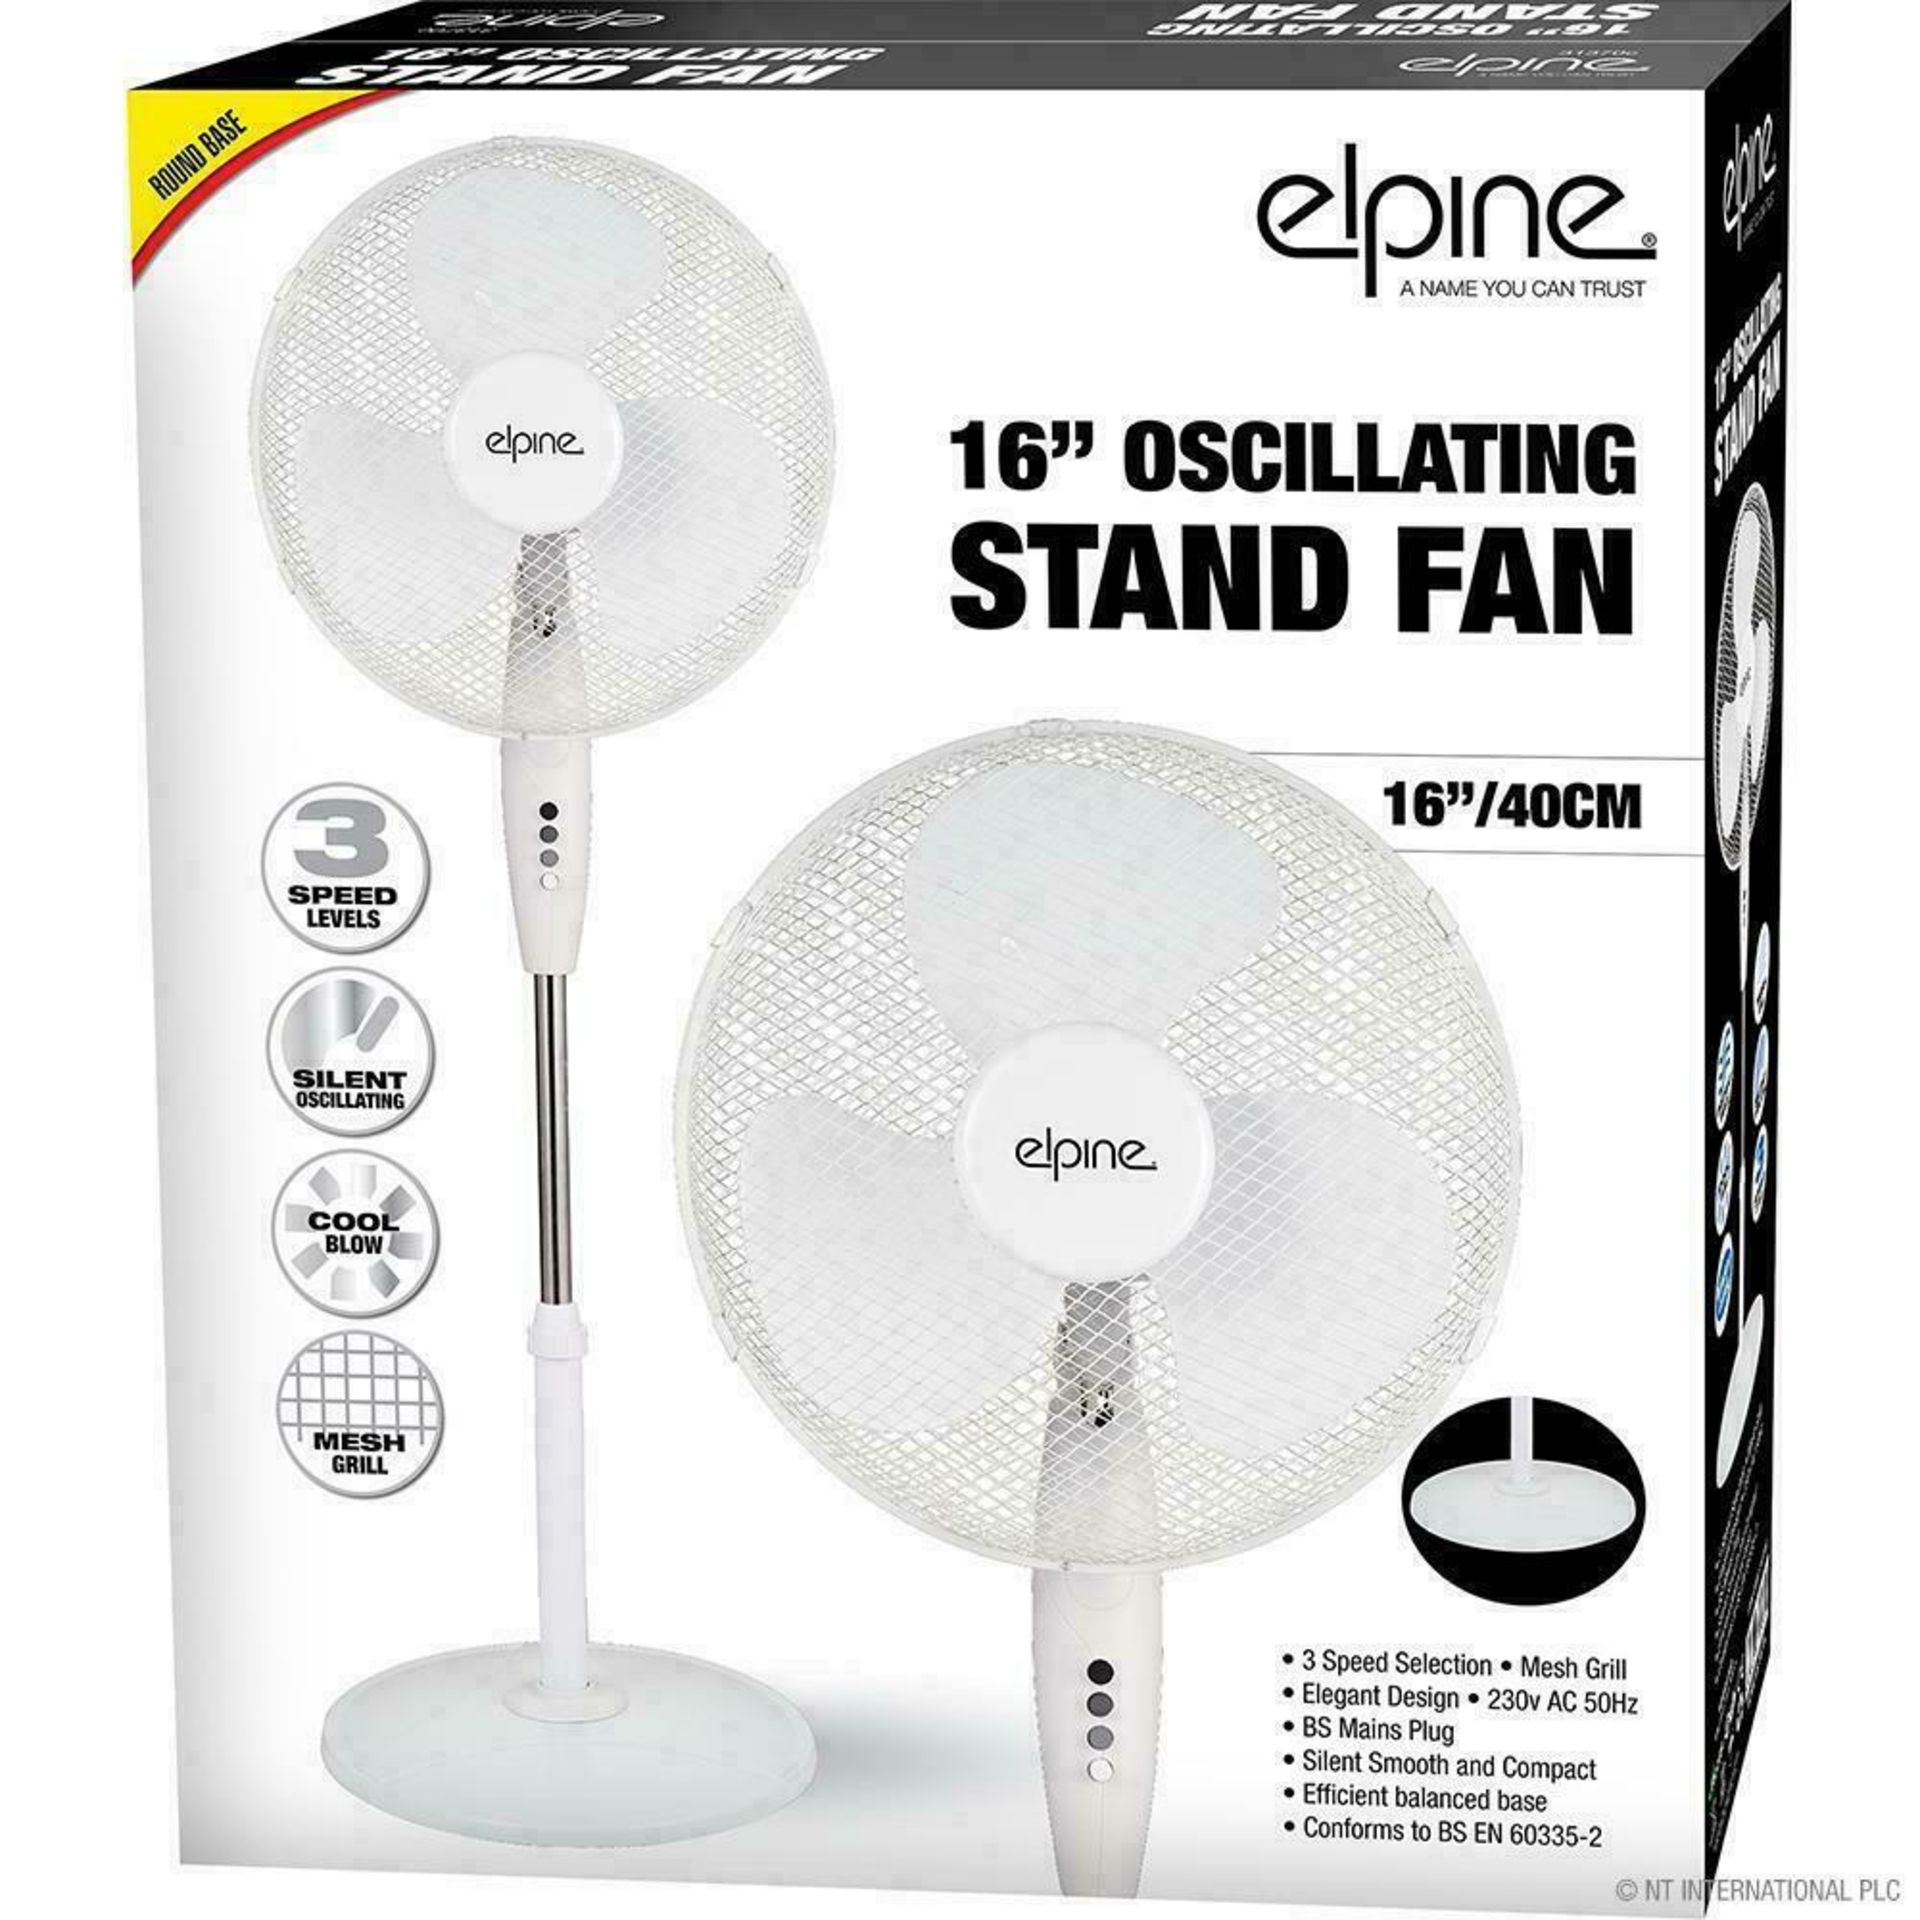 New 16" 40cm Black Oscillating Standing Fan With 3 Speeds